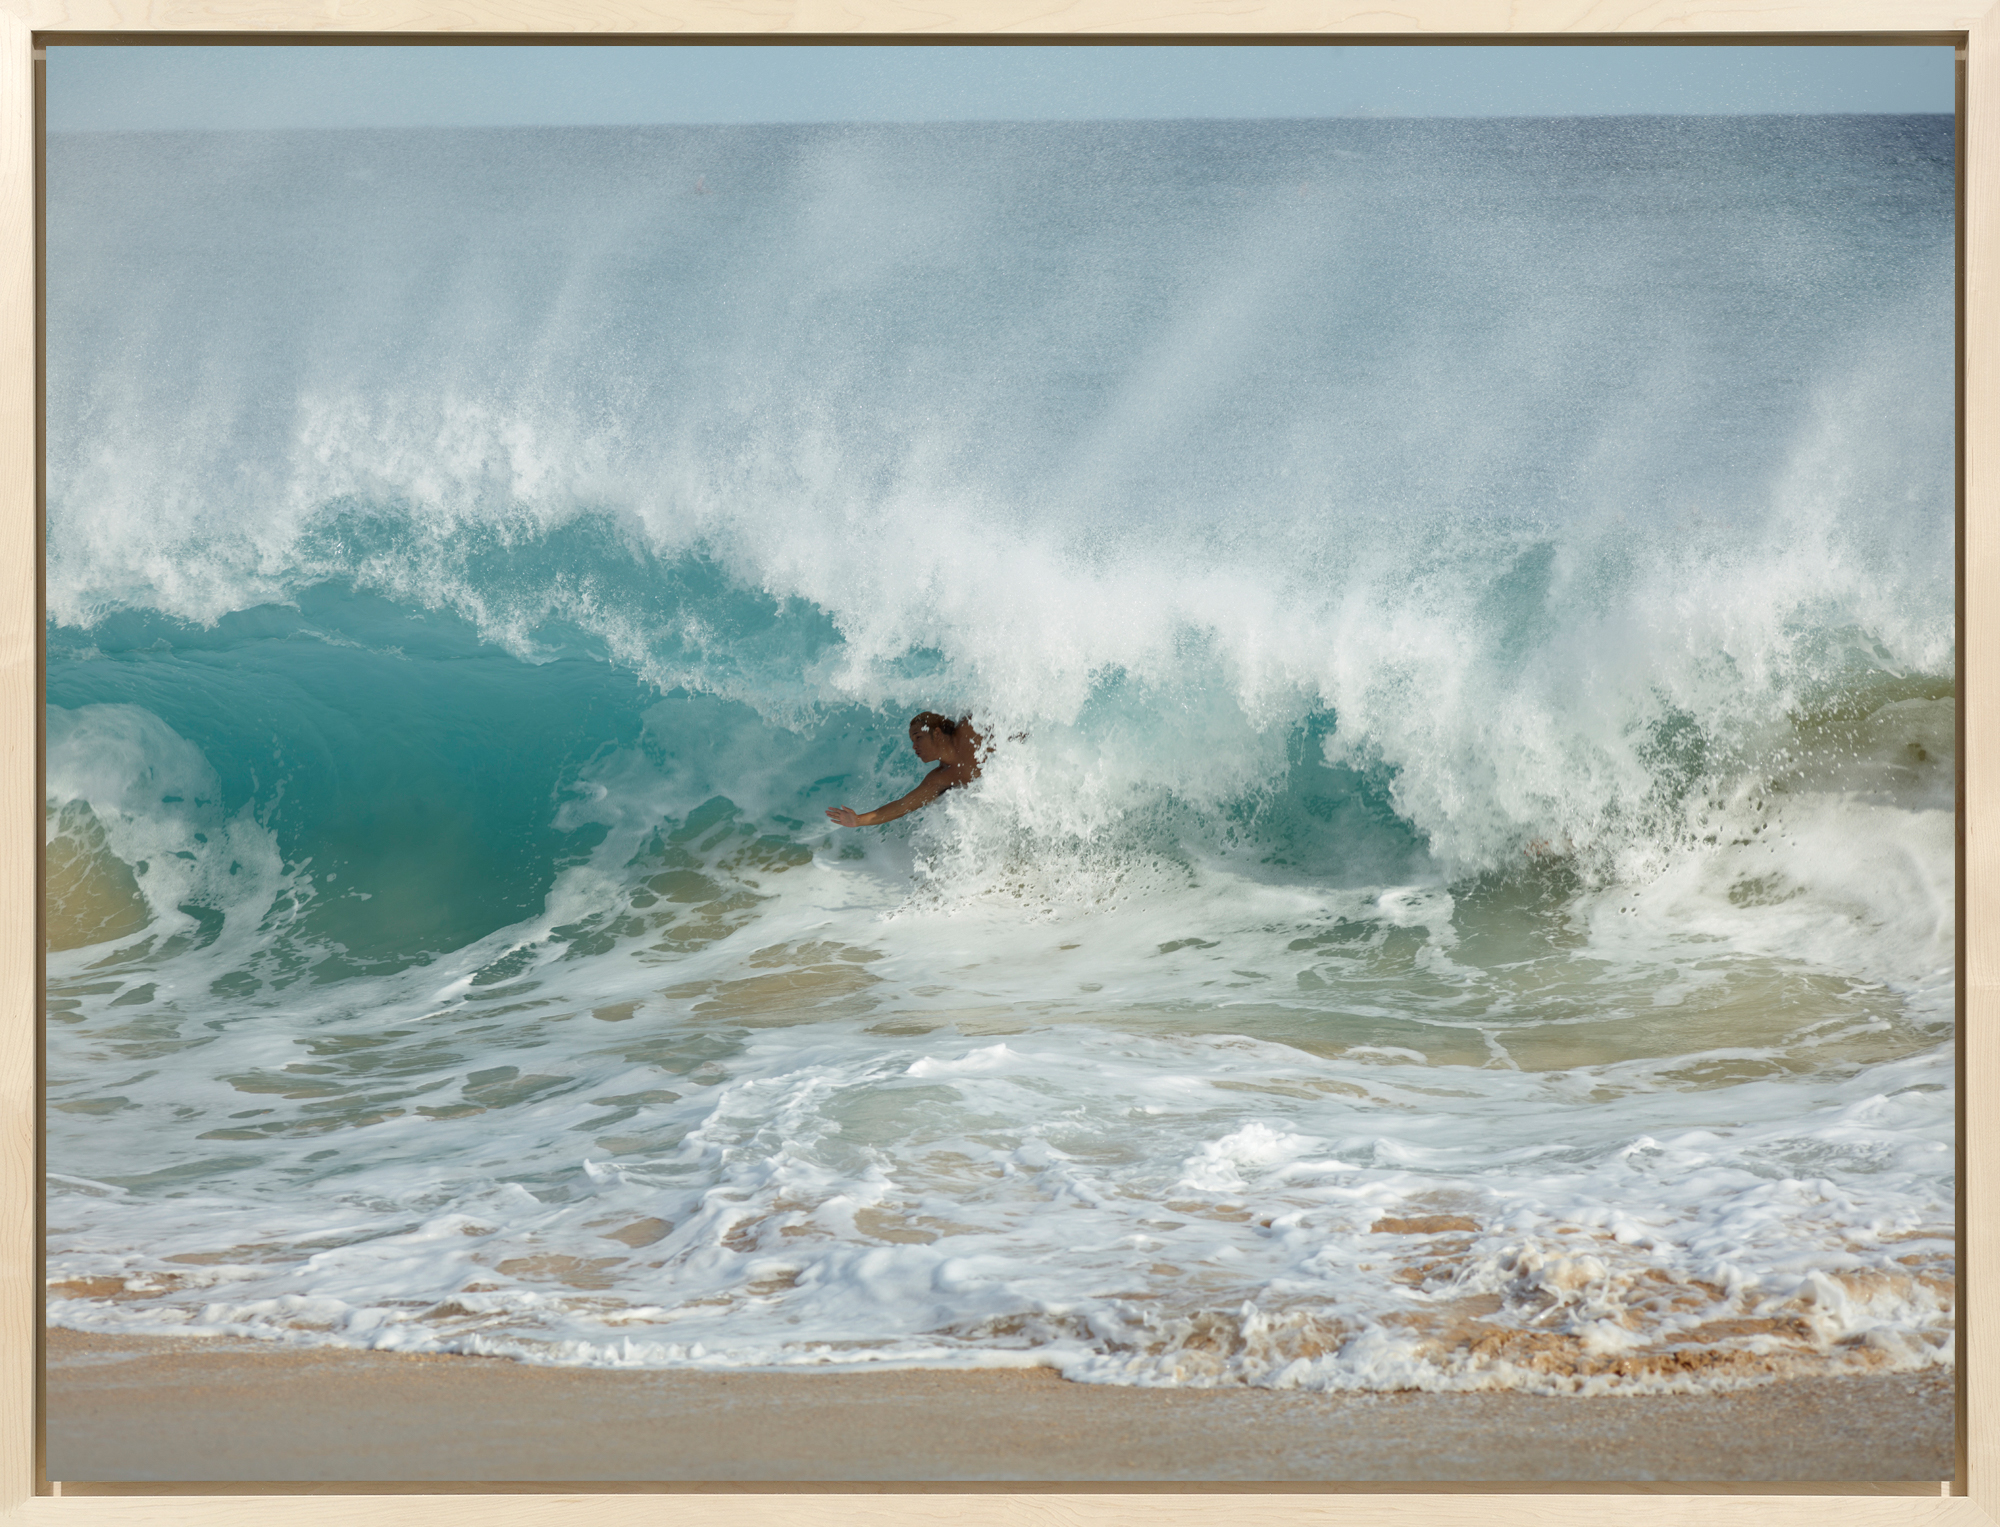 Color photograph of a surfer riding a wave as it crashes onto the shore framed in a bleached wood